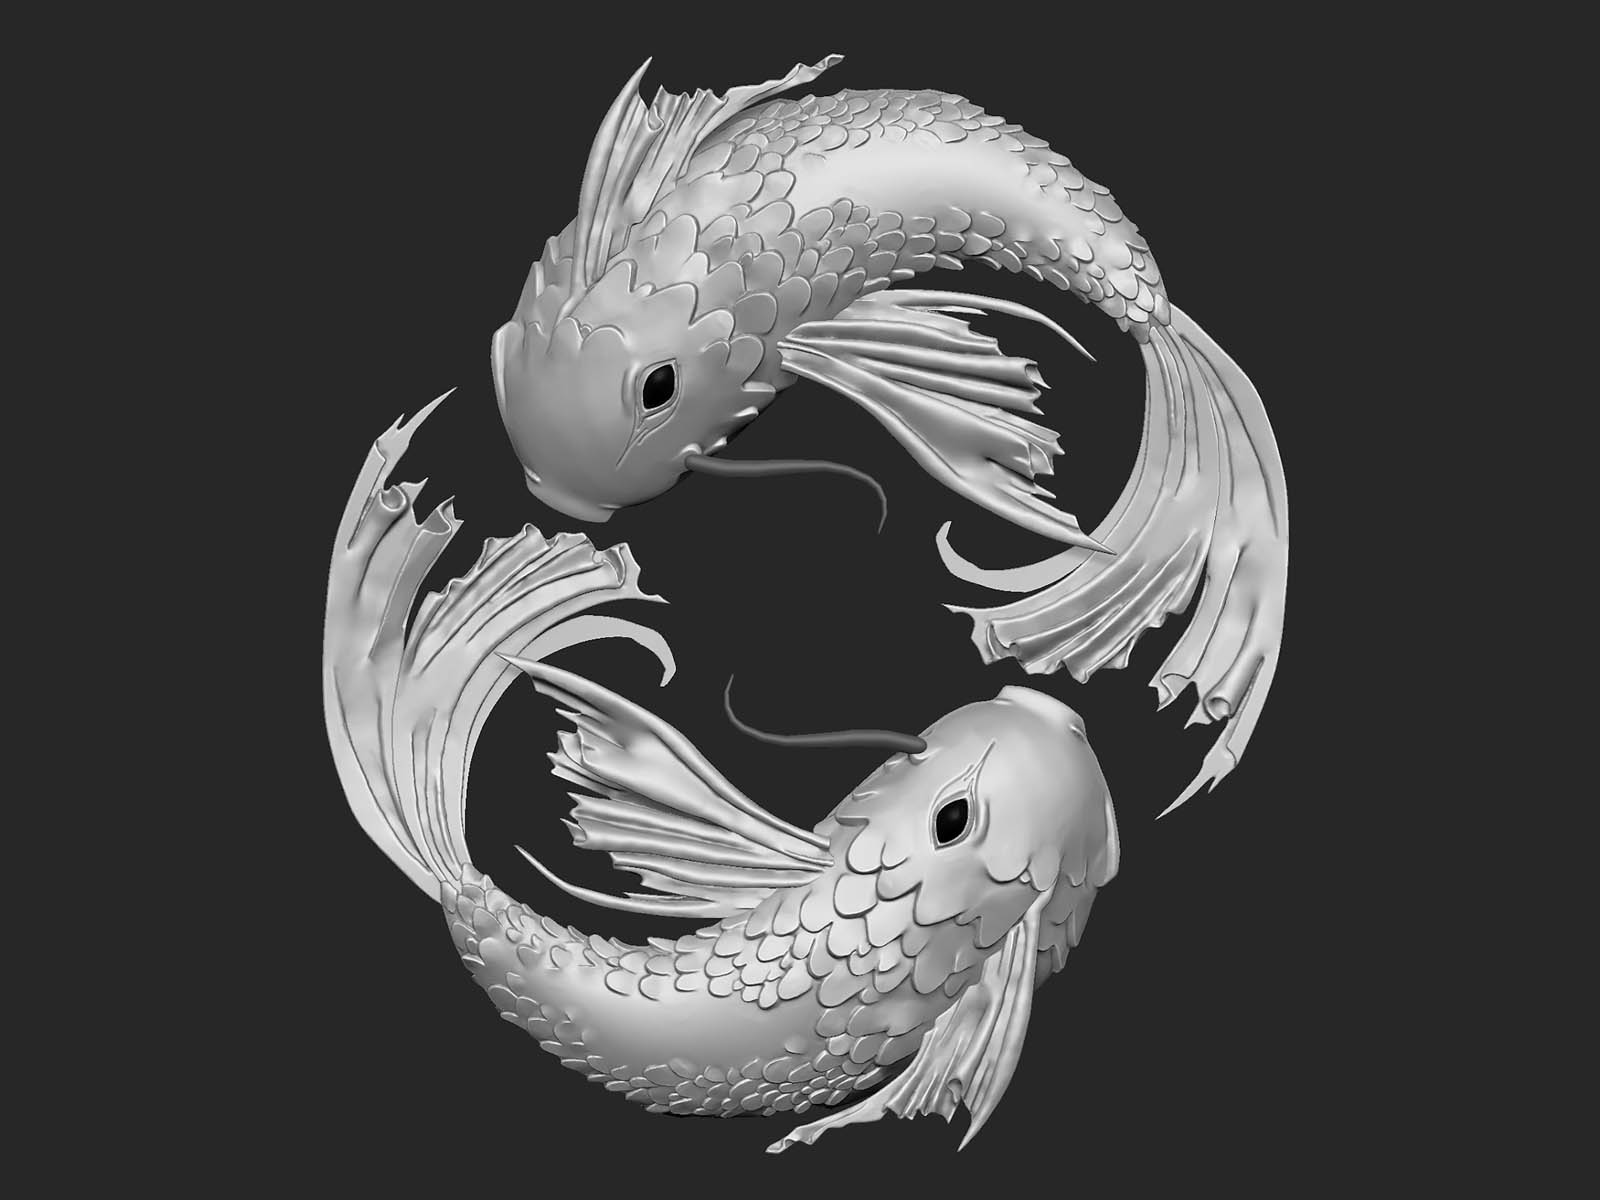 49+] Pisces Wallpapers Pictures